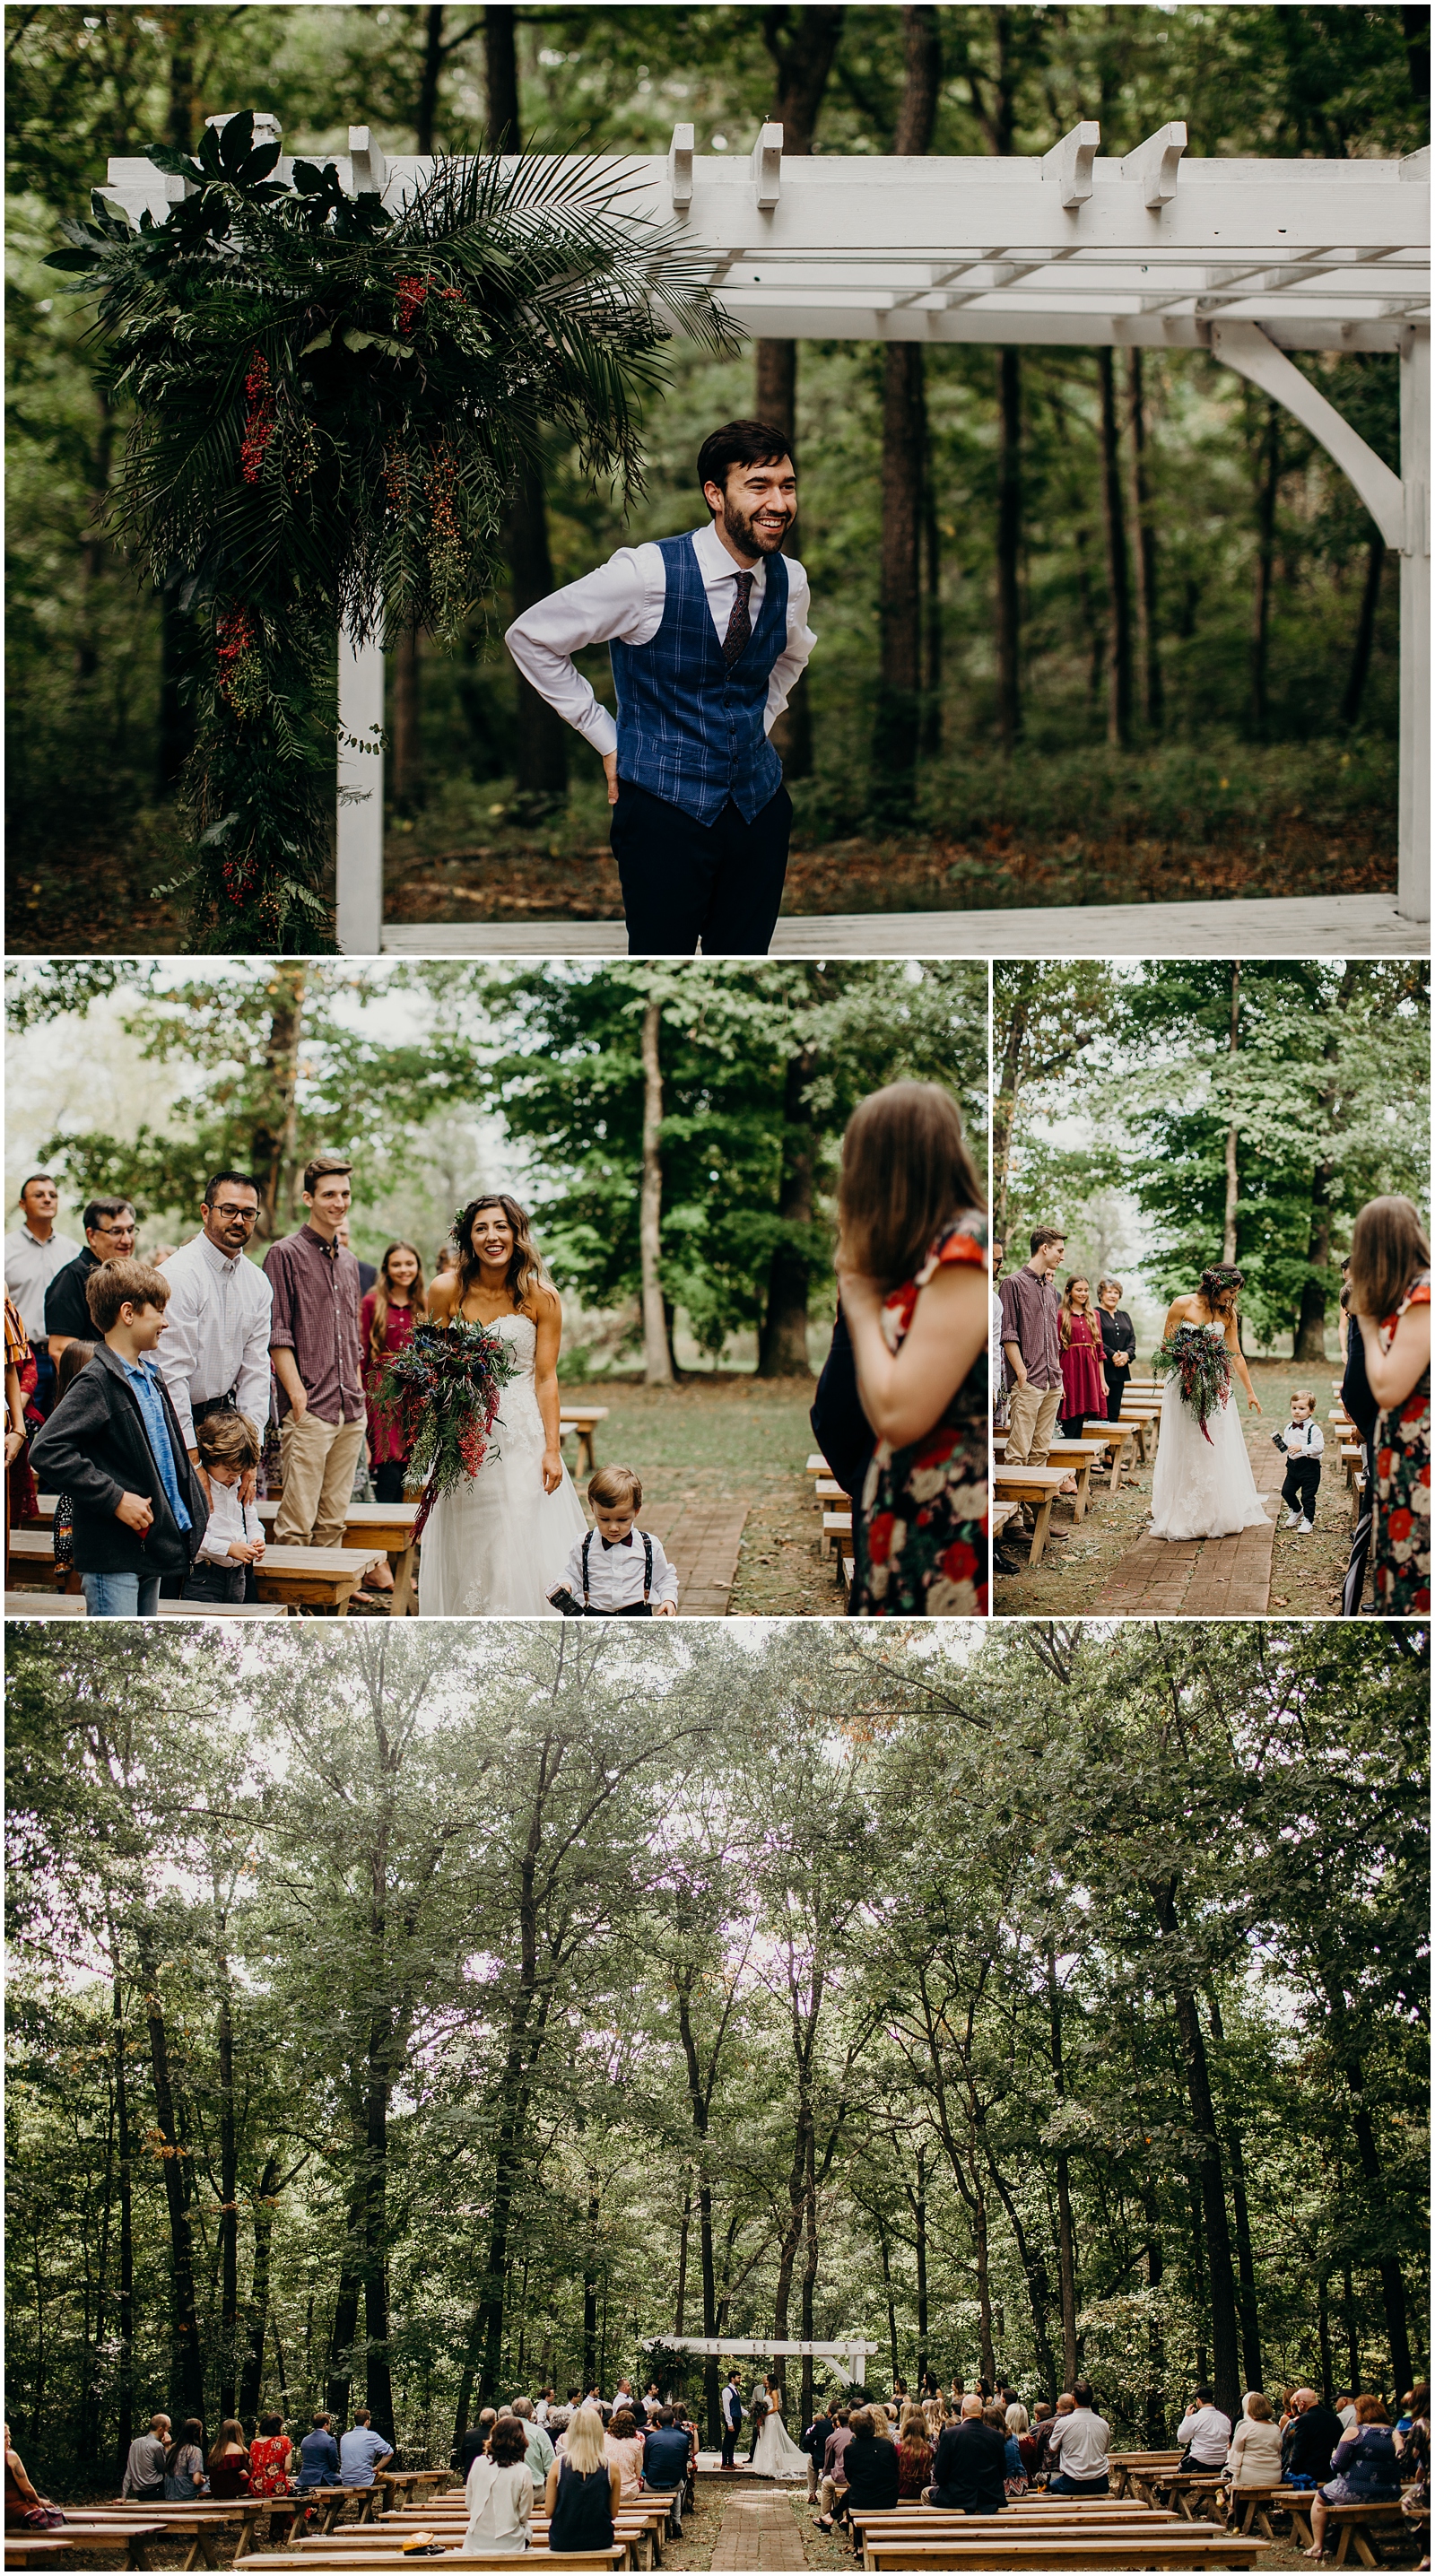 kindred bard, kindred north, Arkansas wedding photographer, scotland wedding photographer, outdoor wedding, Arkansas wedding photographer, mismatched bridesmaids dresses, barn wedding, first look, sparkler exit, the Johnsons photo, the Johnsons, Maine wedding photographer 